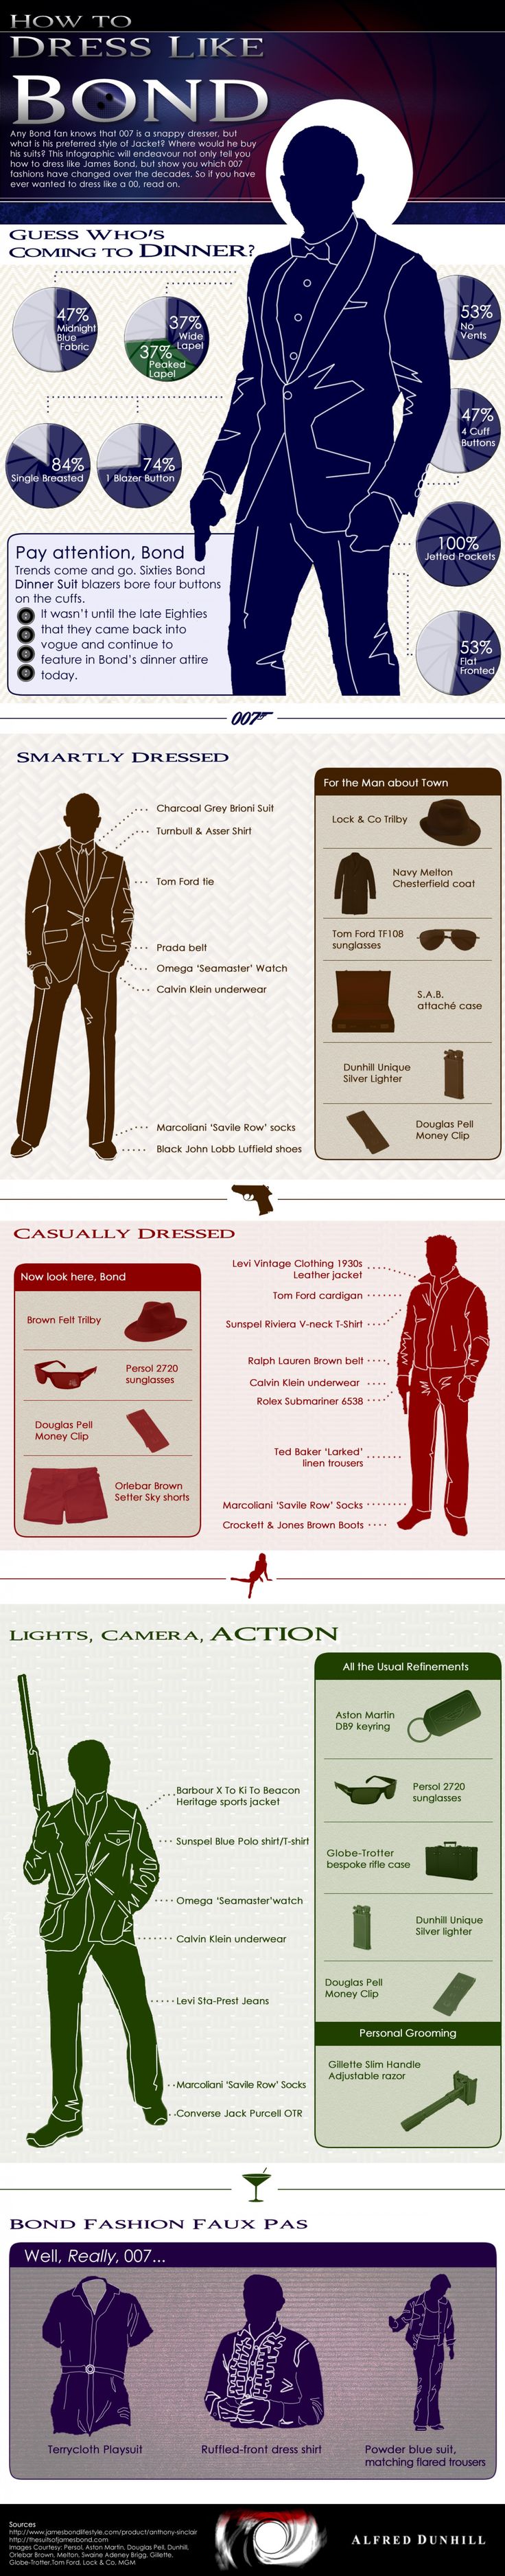 Fashion infographic : For men: How to Dress Like James Bond Infographic ...